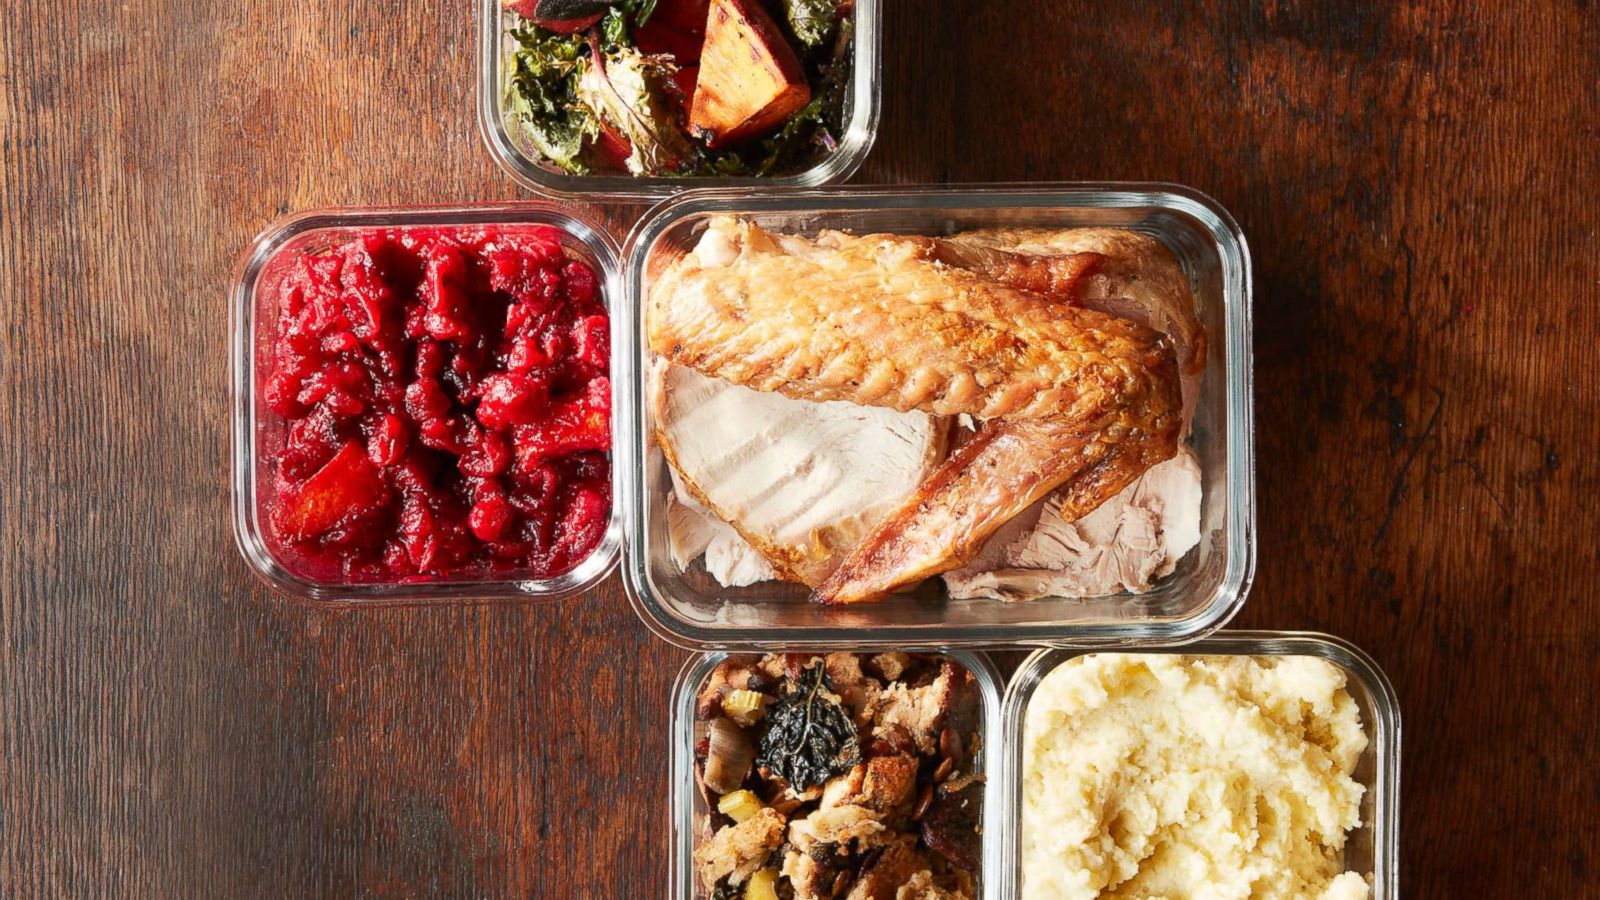 https://s.abcnews.com/images/GMA/thanksgiving-leftovers-gty-ps-181121_hpMain_16x9_1600.jpg